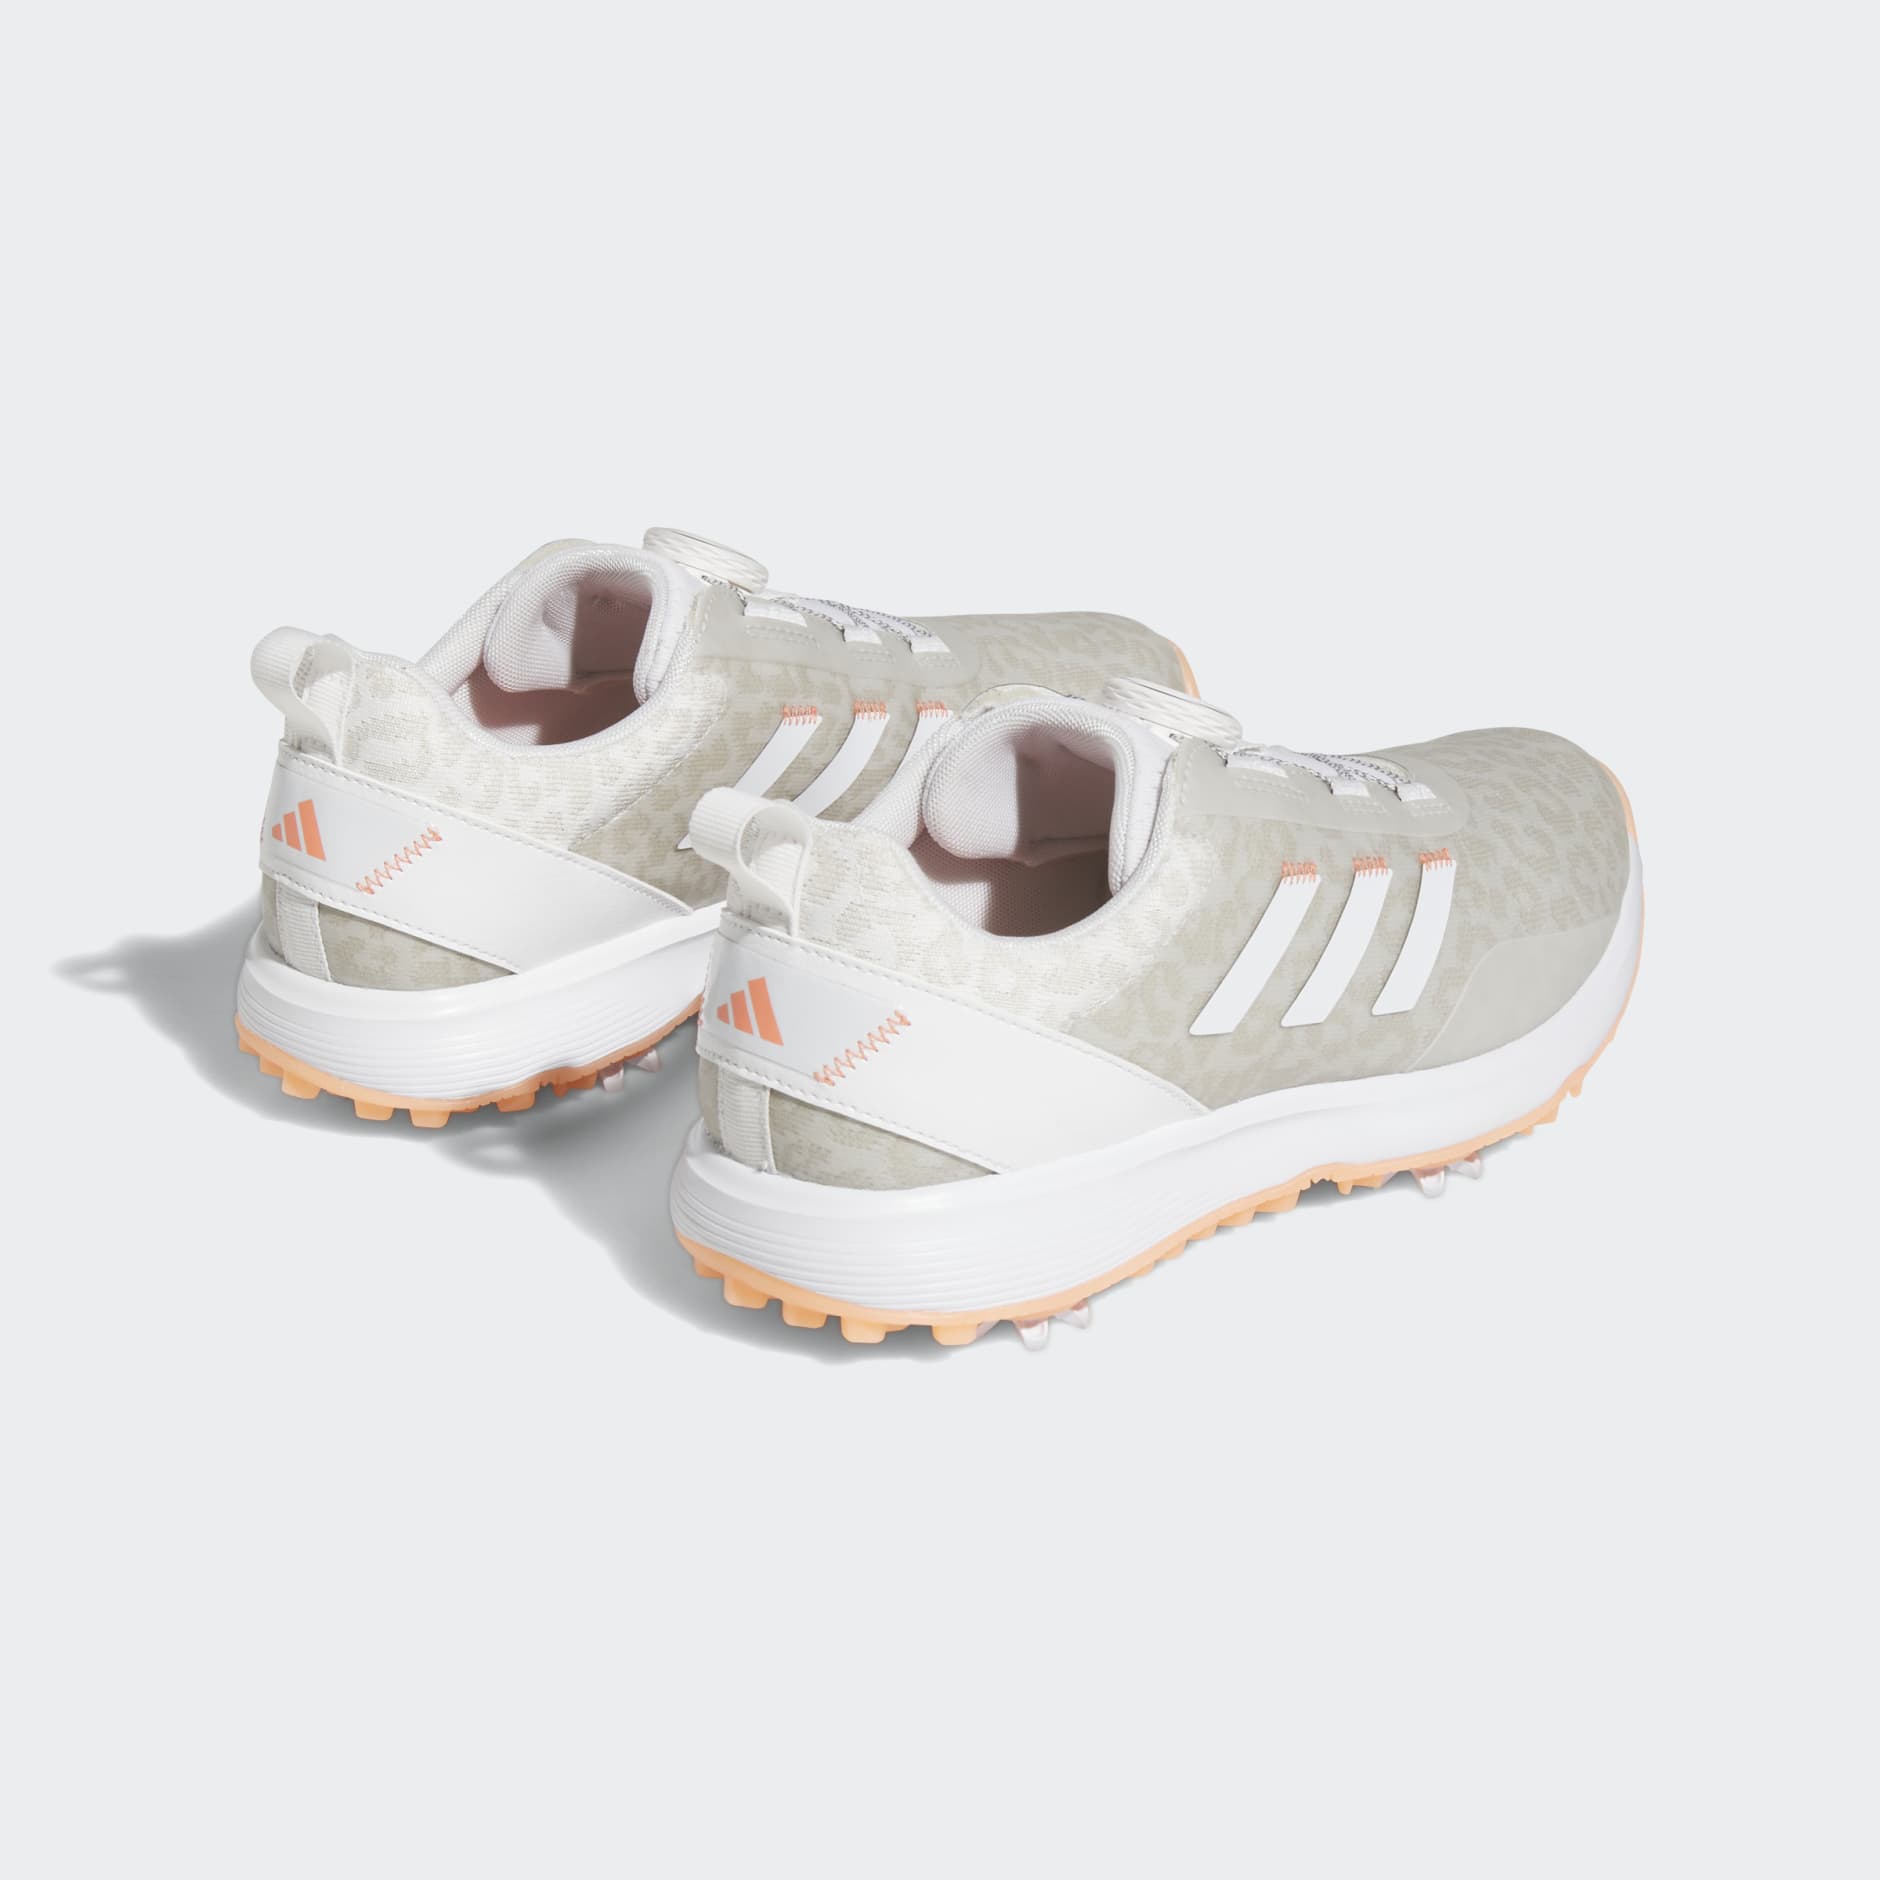 Shoes - S2G BOA Golf Shoes - White | adidas South Africa